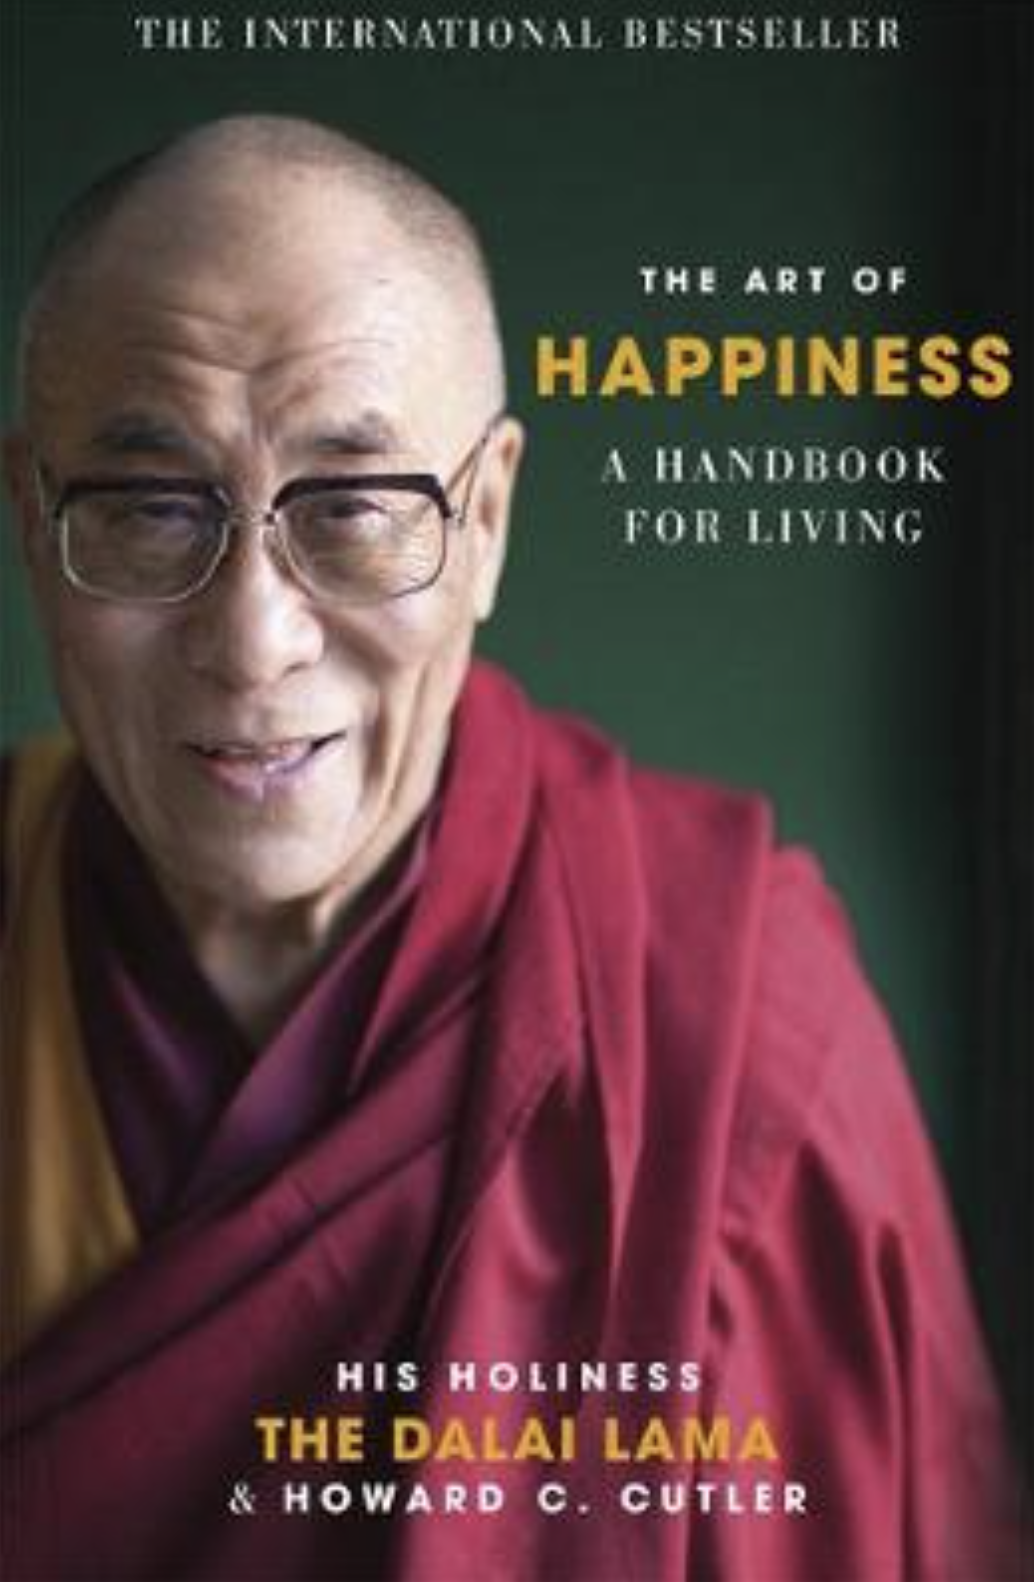 THE ART OF HAPPINESS A HANDBOOK FOR LIVING HIS HOLINESS THE DALAI LAMA & HOWARD C. CUTLER